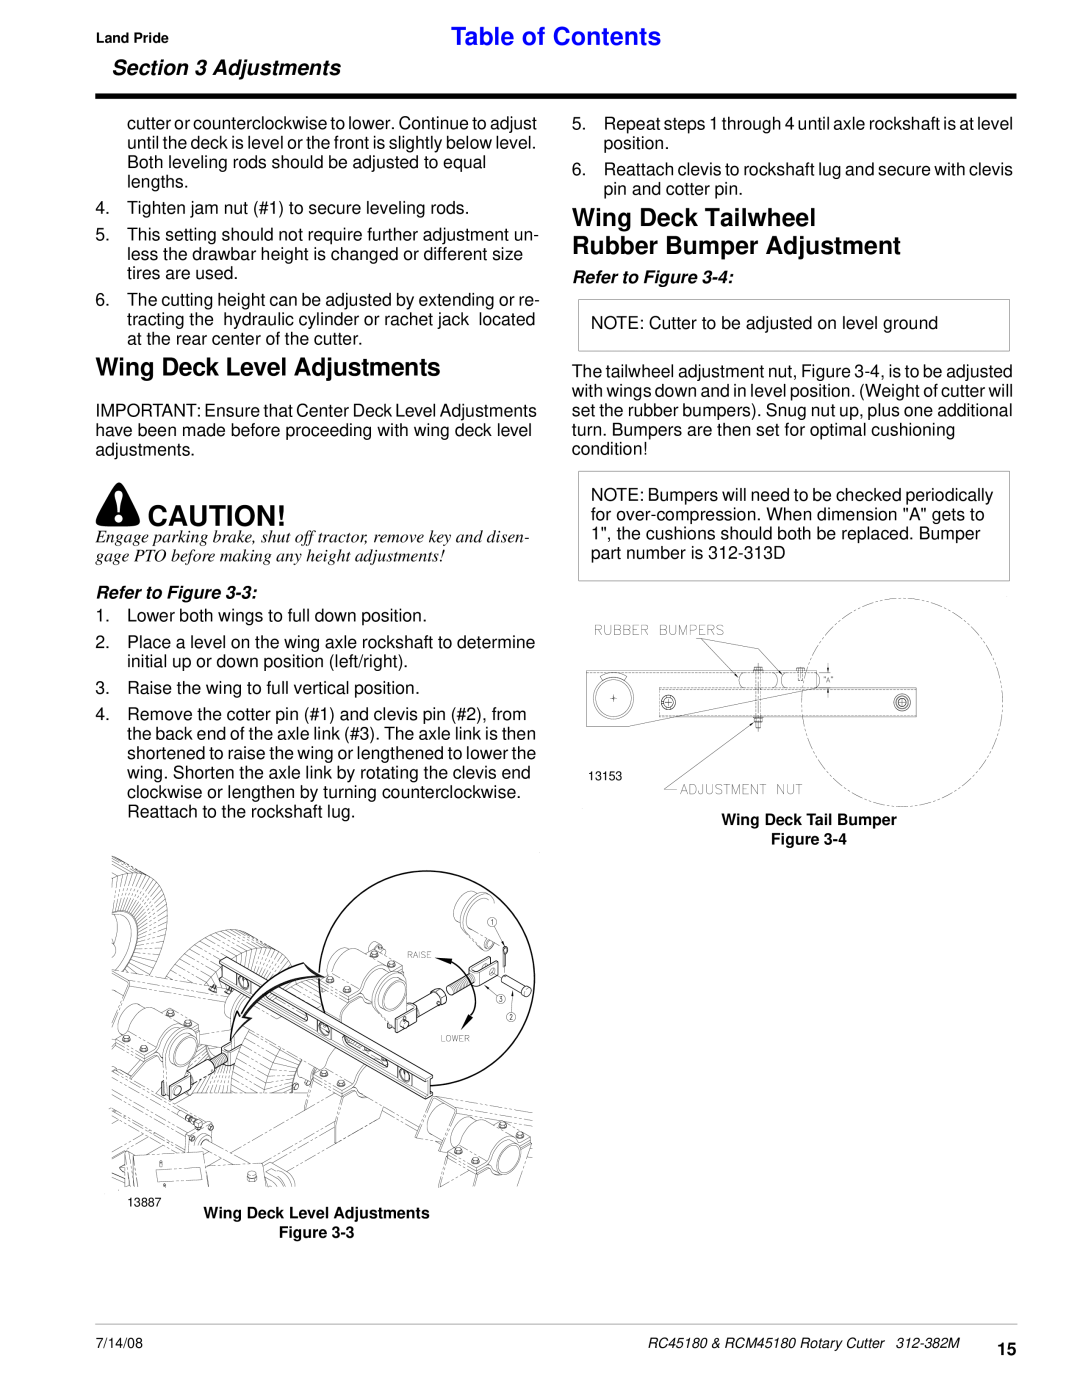 Land Pride RCM45180, RC45180 Wing Deck Level Adjustments, Wing Deck Tailwheel Rubber Bumper Adjustment, Table of Contents 